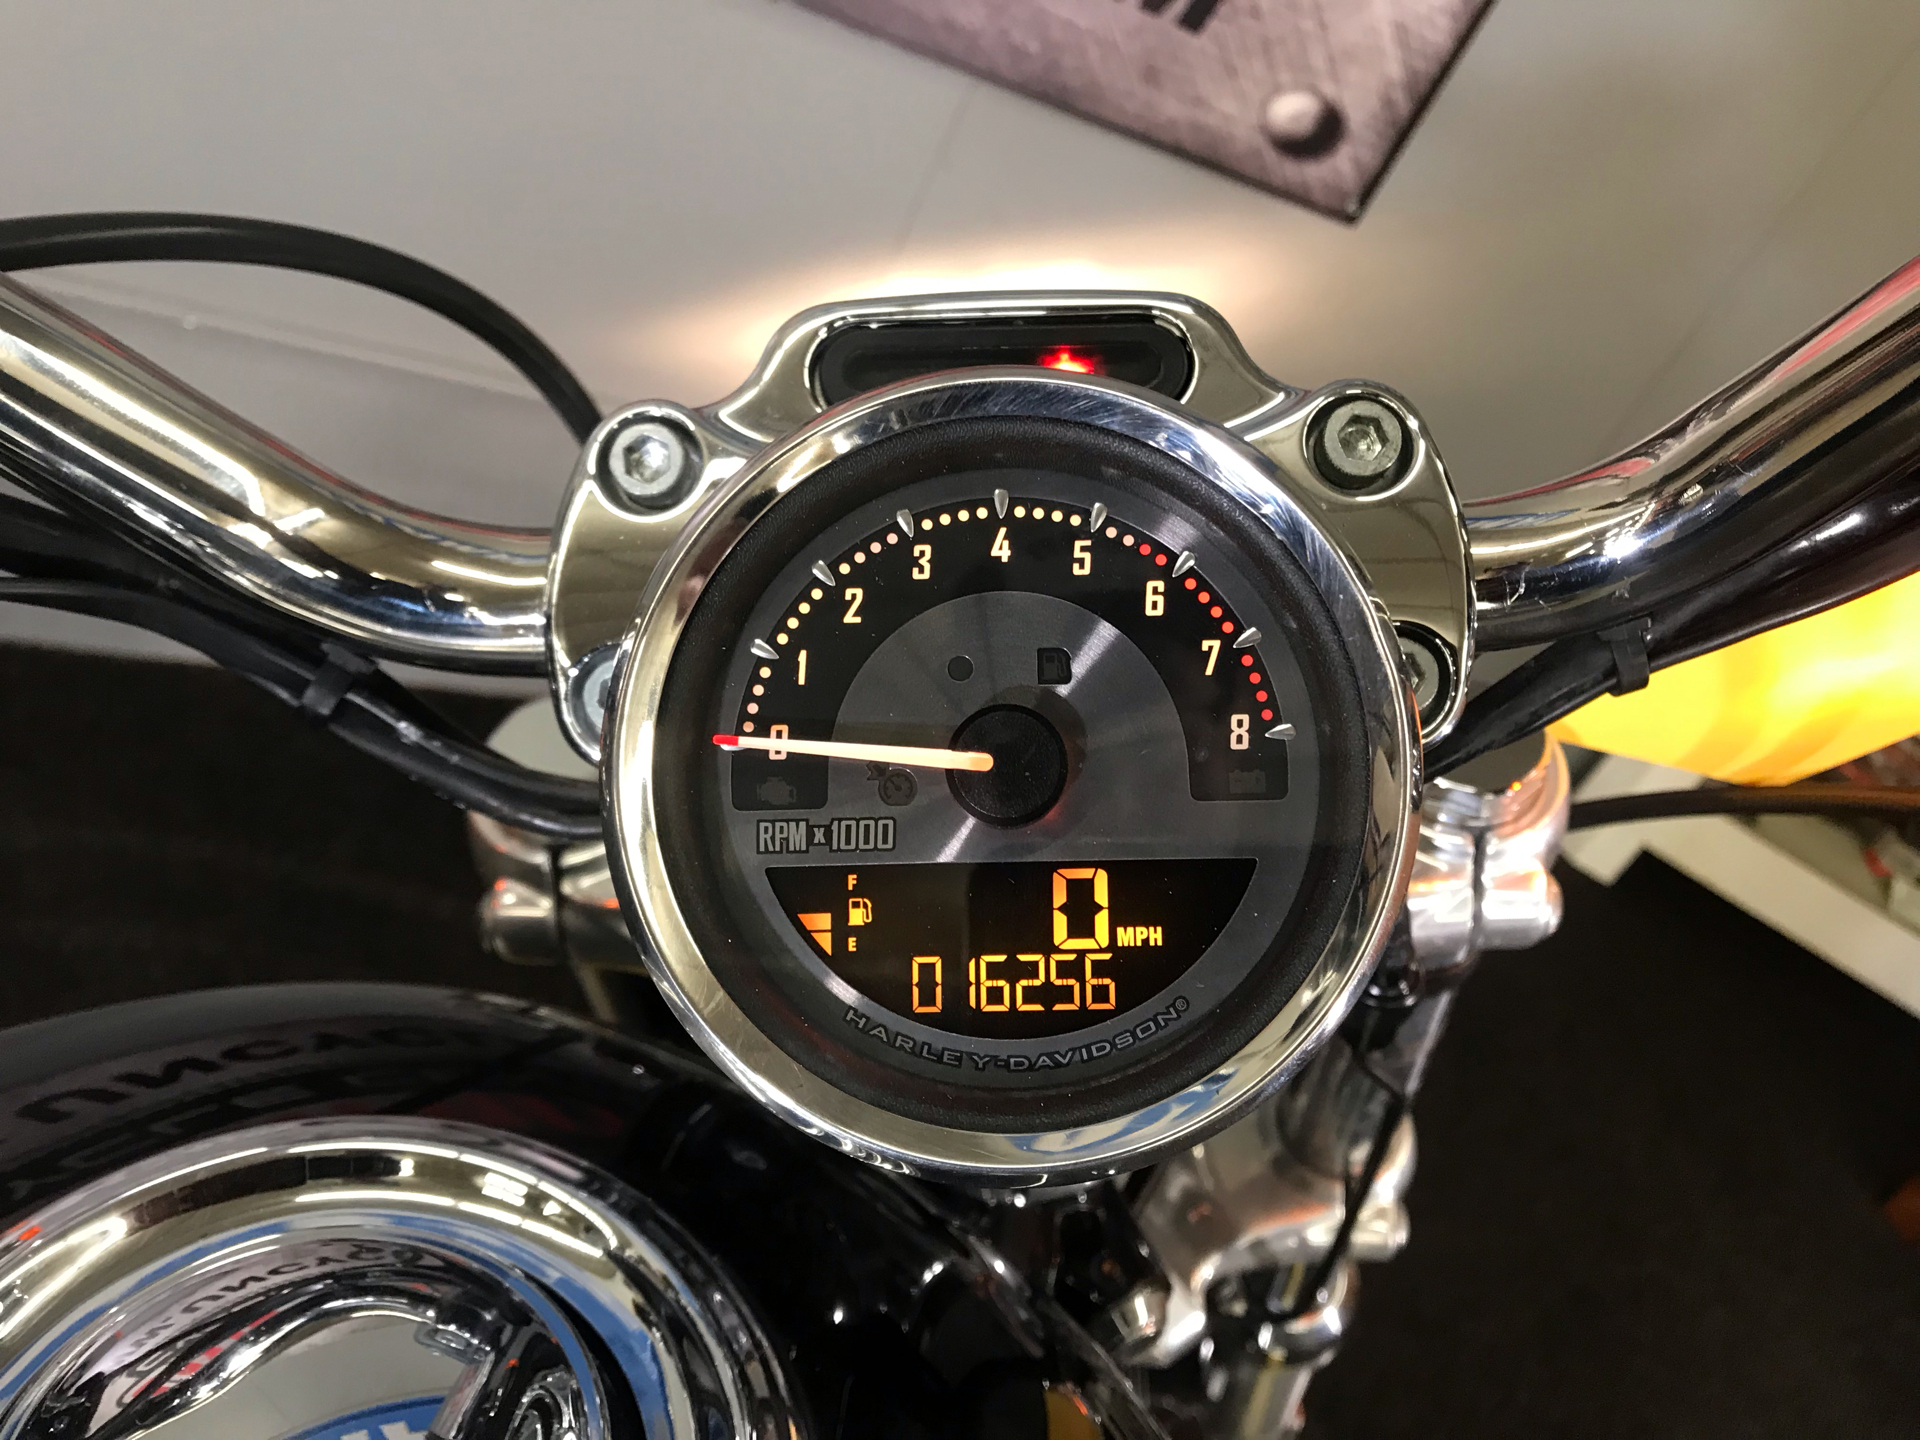 Motorcycle LED Speedometer Fit For Harley Sportster 883 1200 XL883 XL1200 Custom 